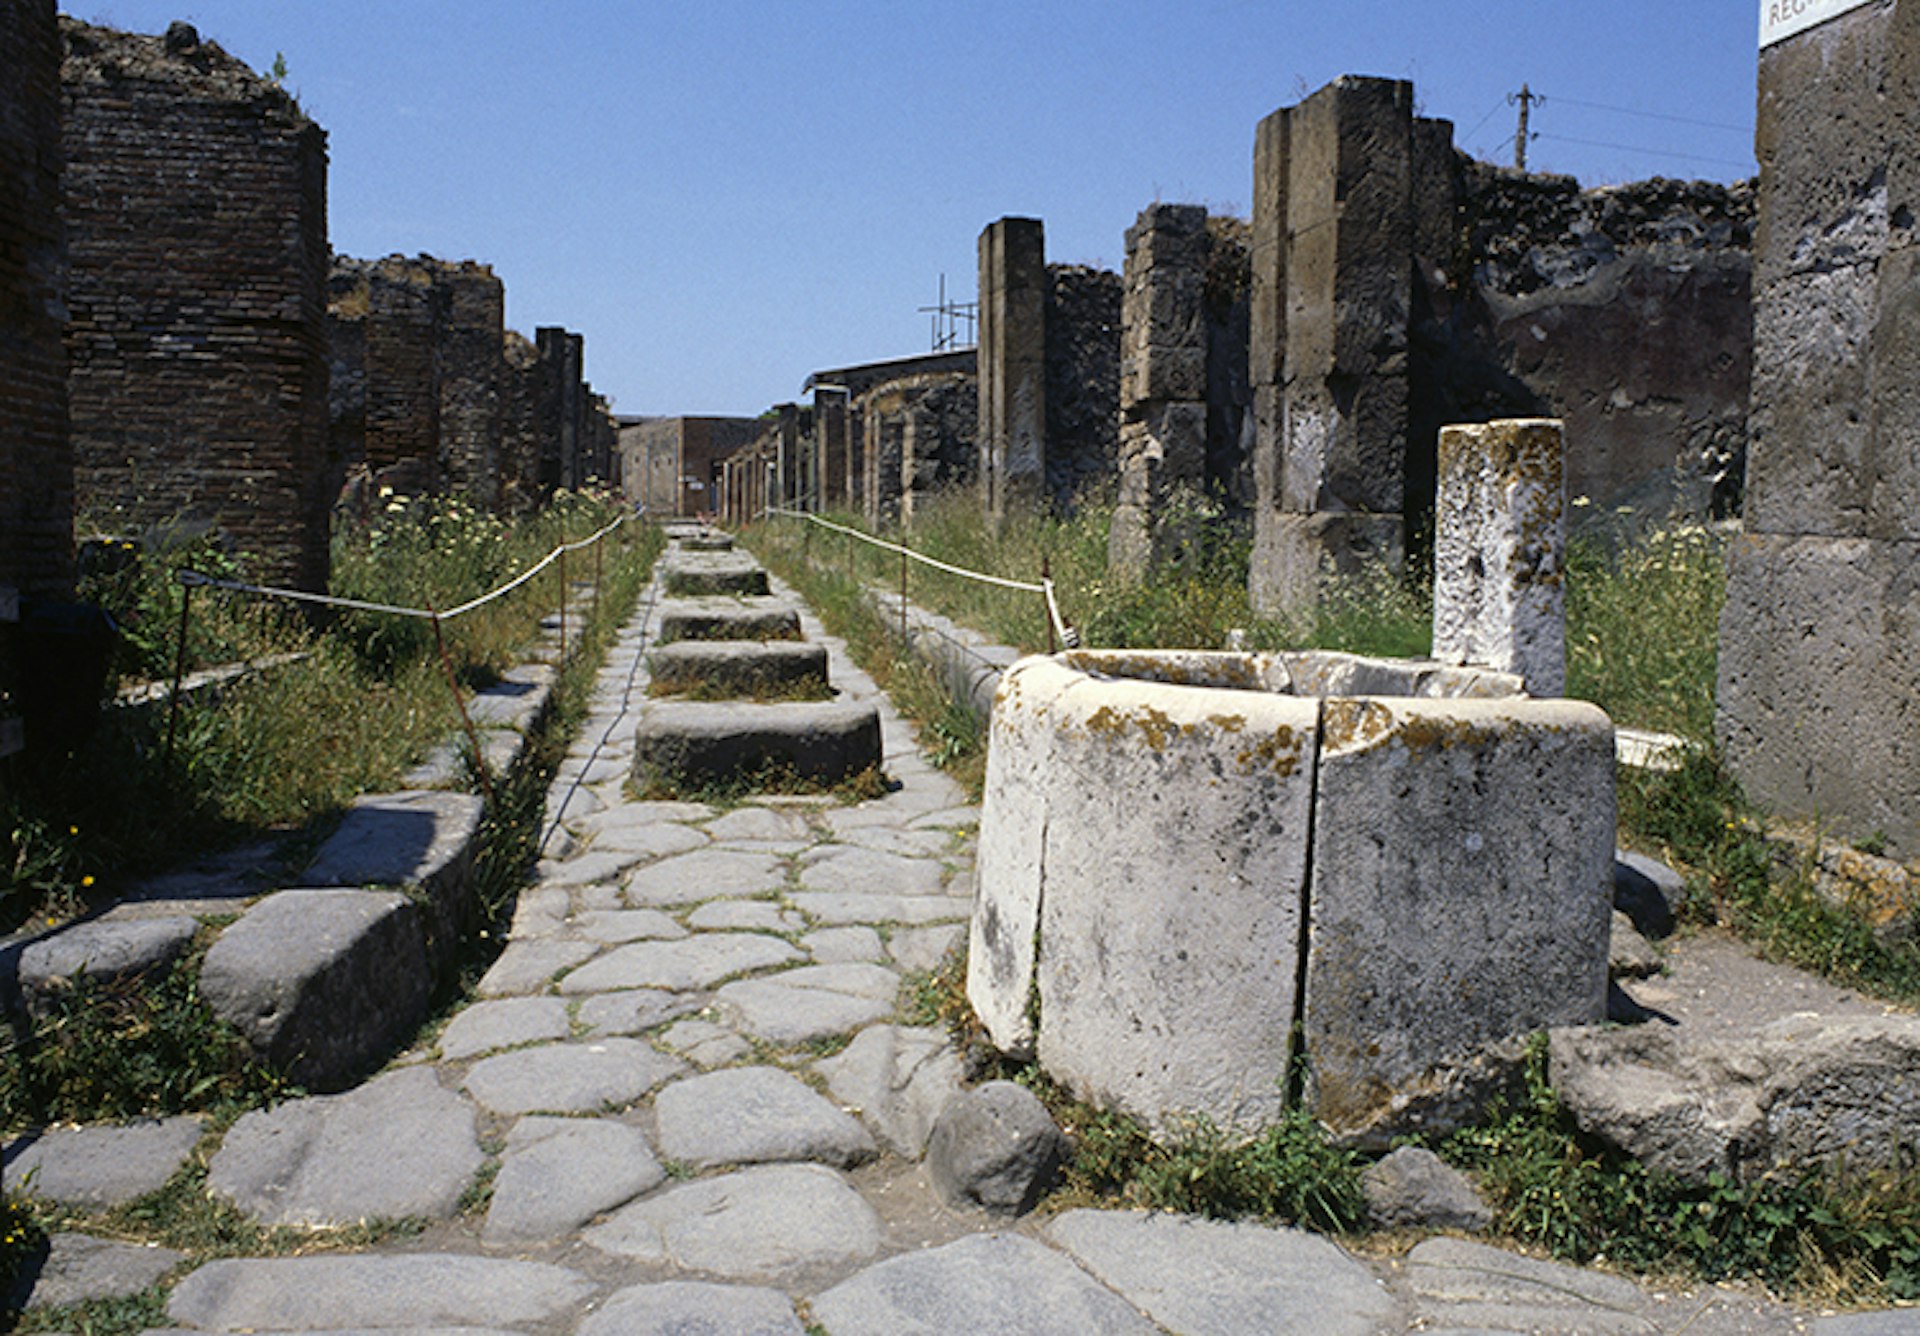 Pompeii's buildings, and even some of its inhabitants, were eerily well preserved at the hour of its doom. Image by De Agostini / Foglia / De Agostini Picture Library / Getty Images